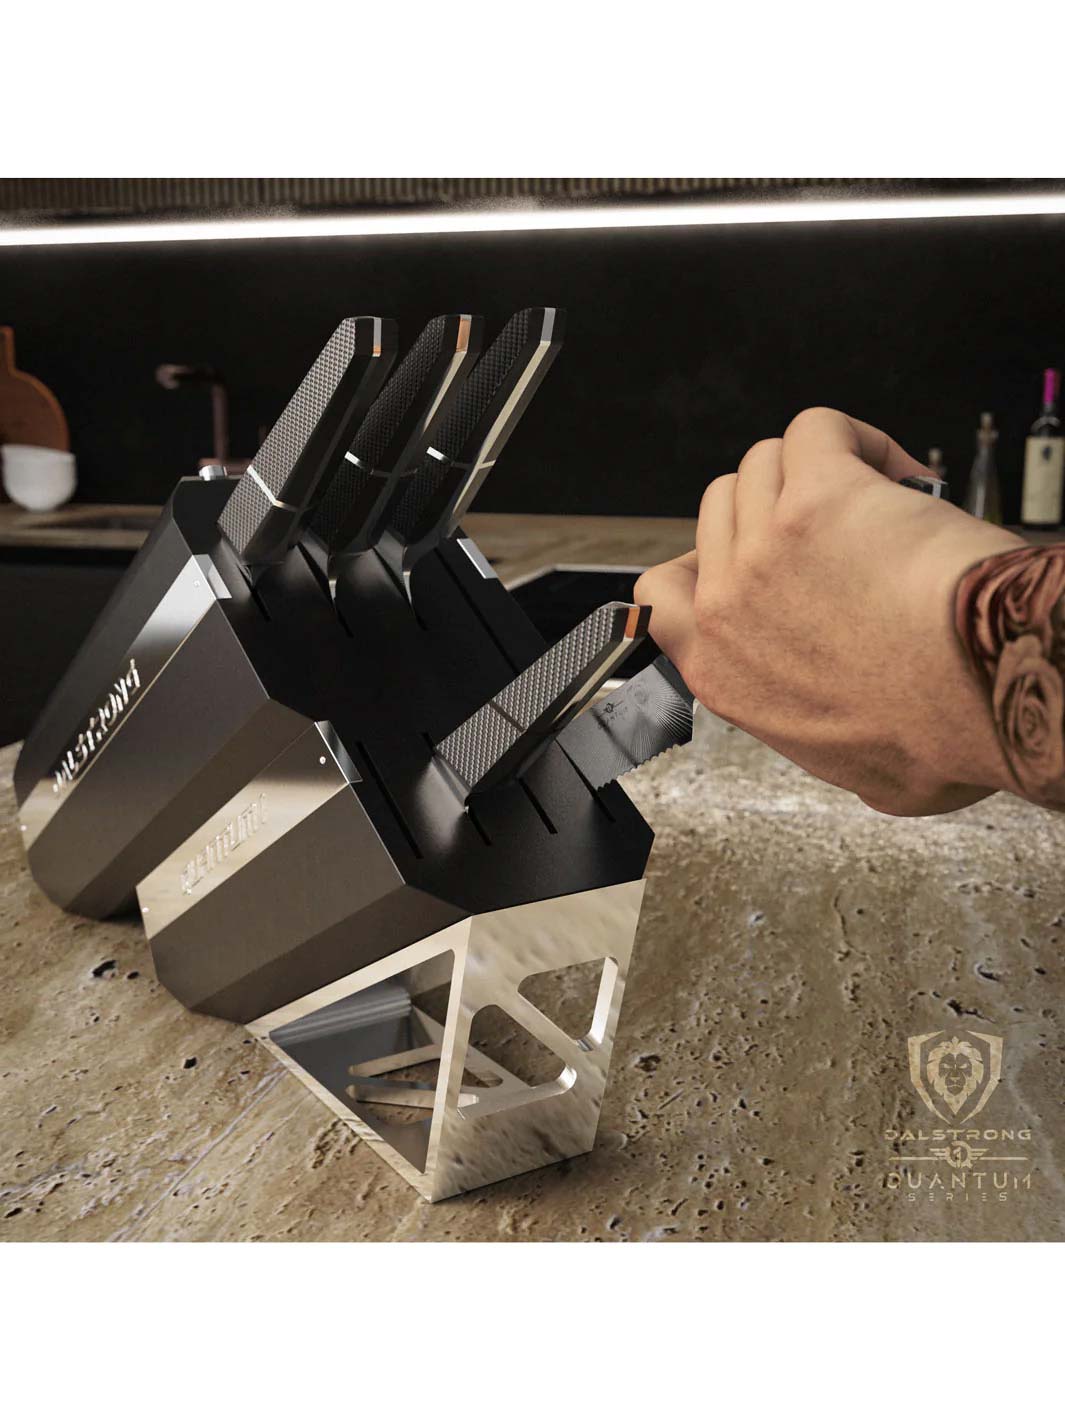 A man's hand holding a knife from the Dalstrong quantum 1 series 5 piece knife block set.